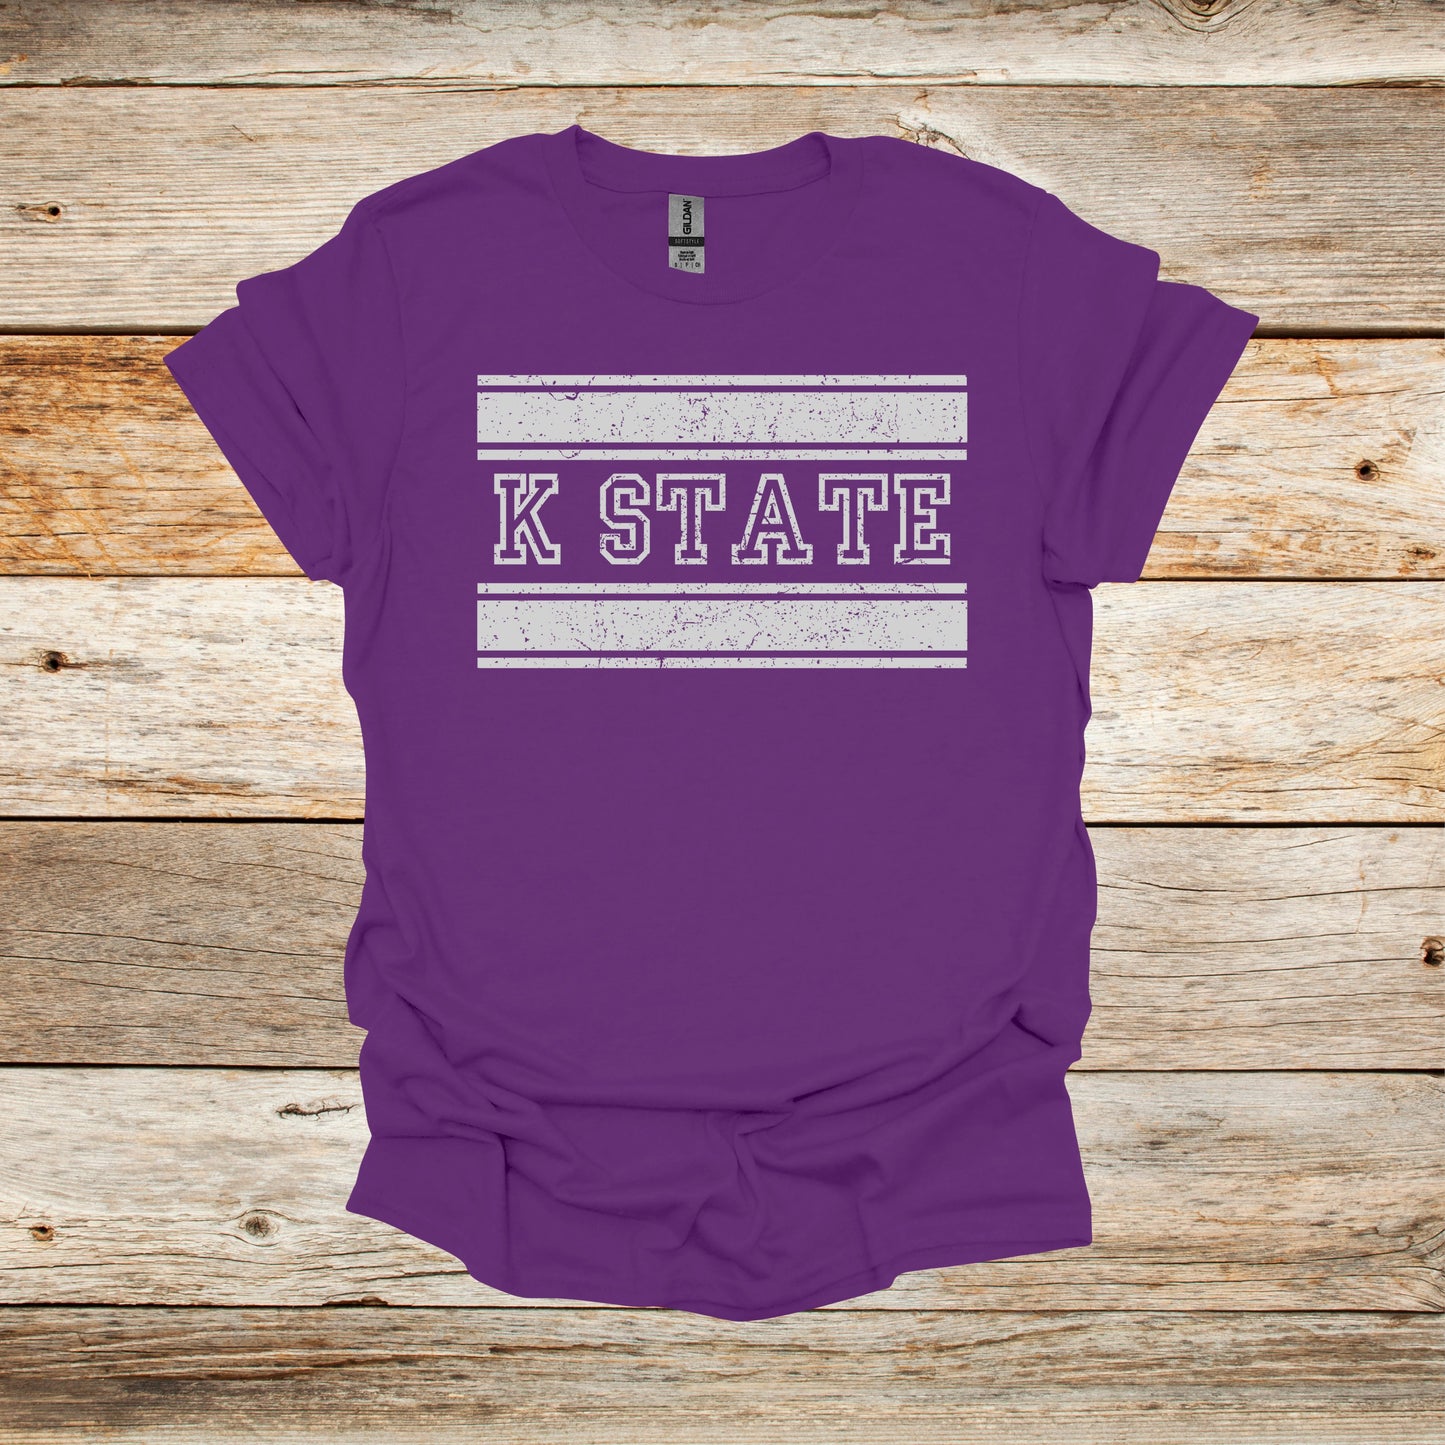 College T Shirt - Kansas State Wildcats - Adult and Children's Tee Shirts T-Shirts Graphic Avenue Purple Adult Small 